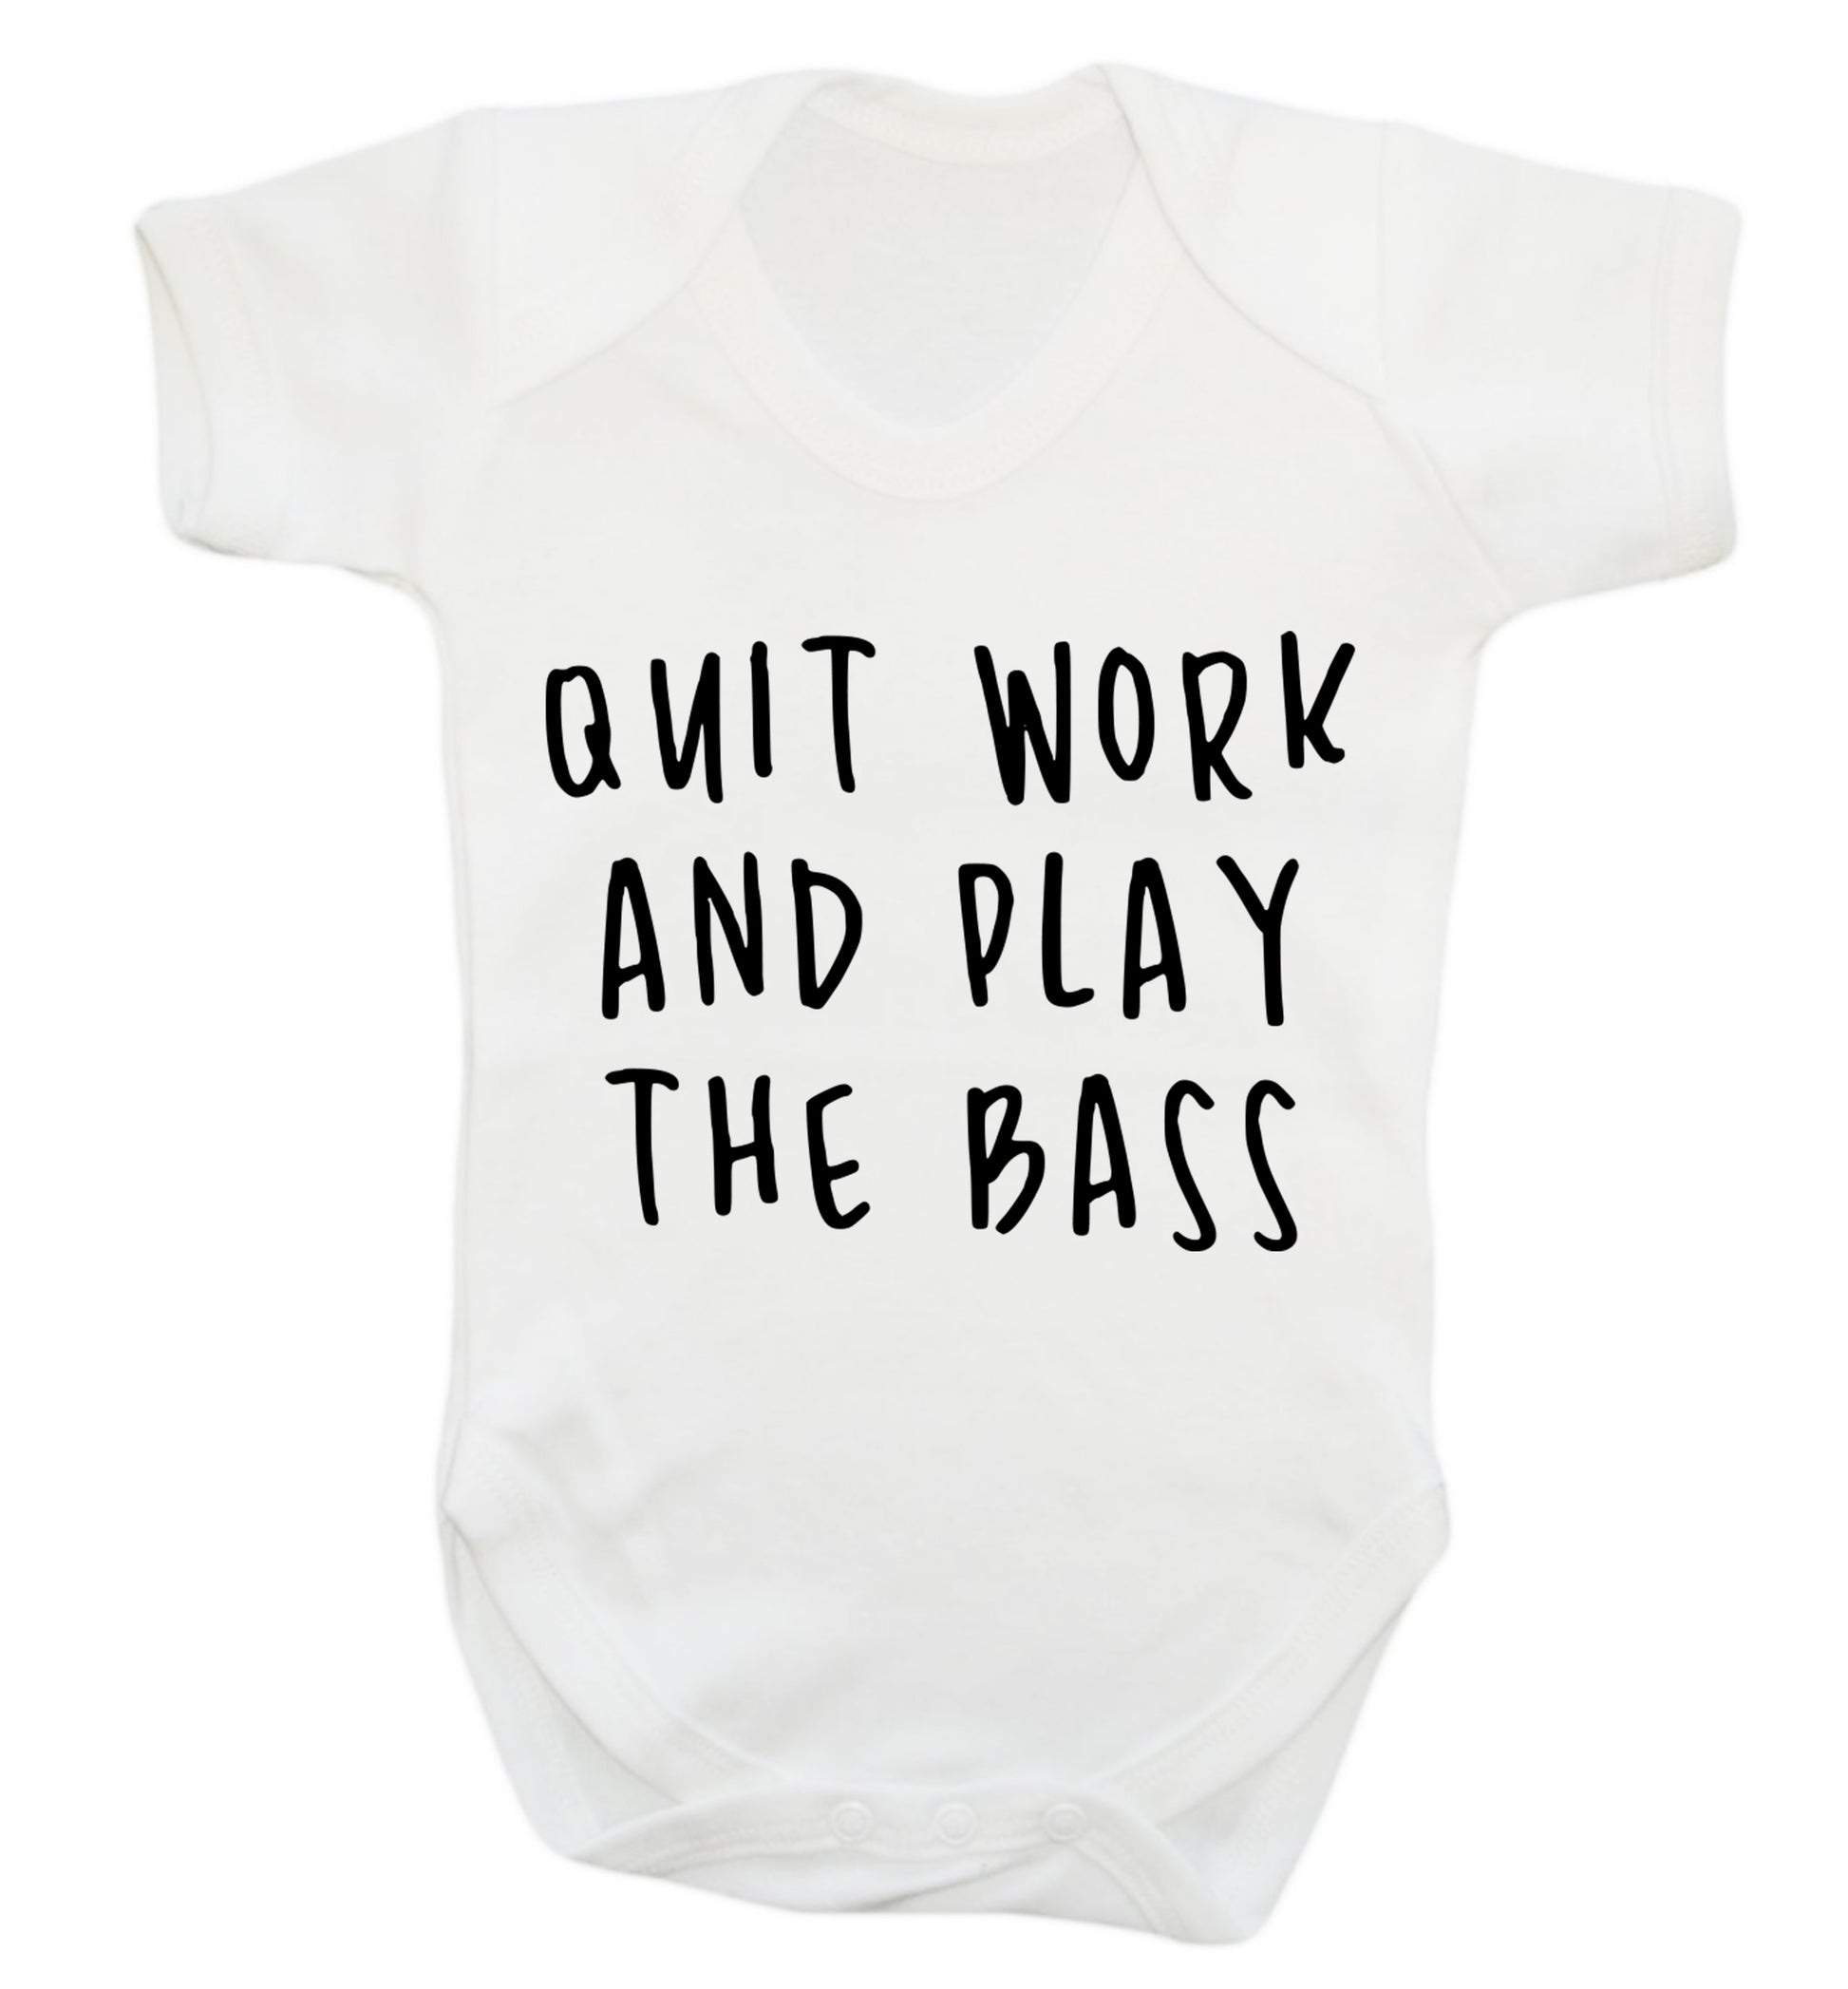 Quit work and play the bass Baby Vest white 18-24 months